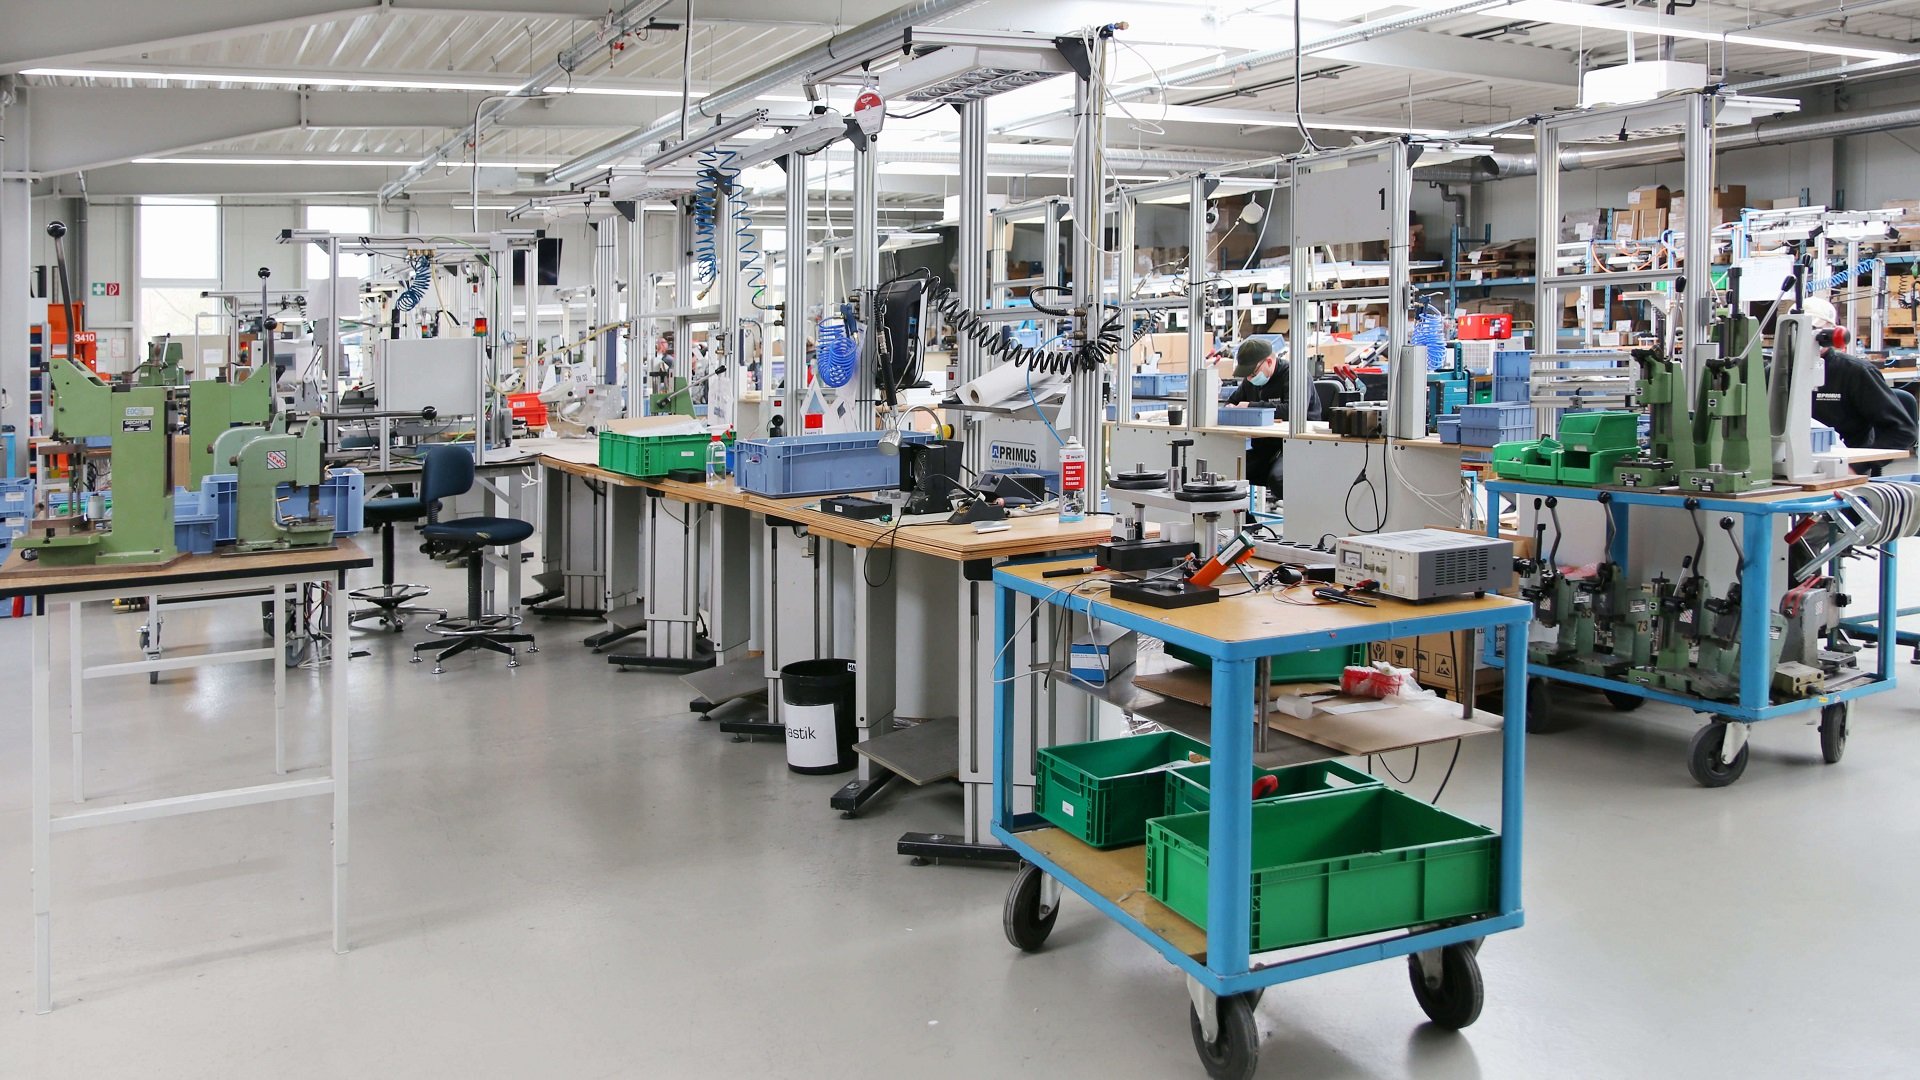 Primus Präzisionstechnik relies on inventory sampling with REMIRA STATCONTROL